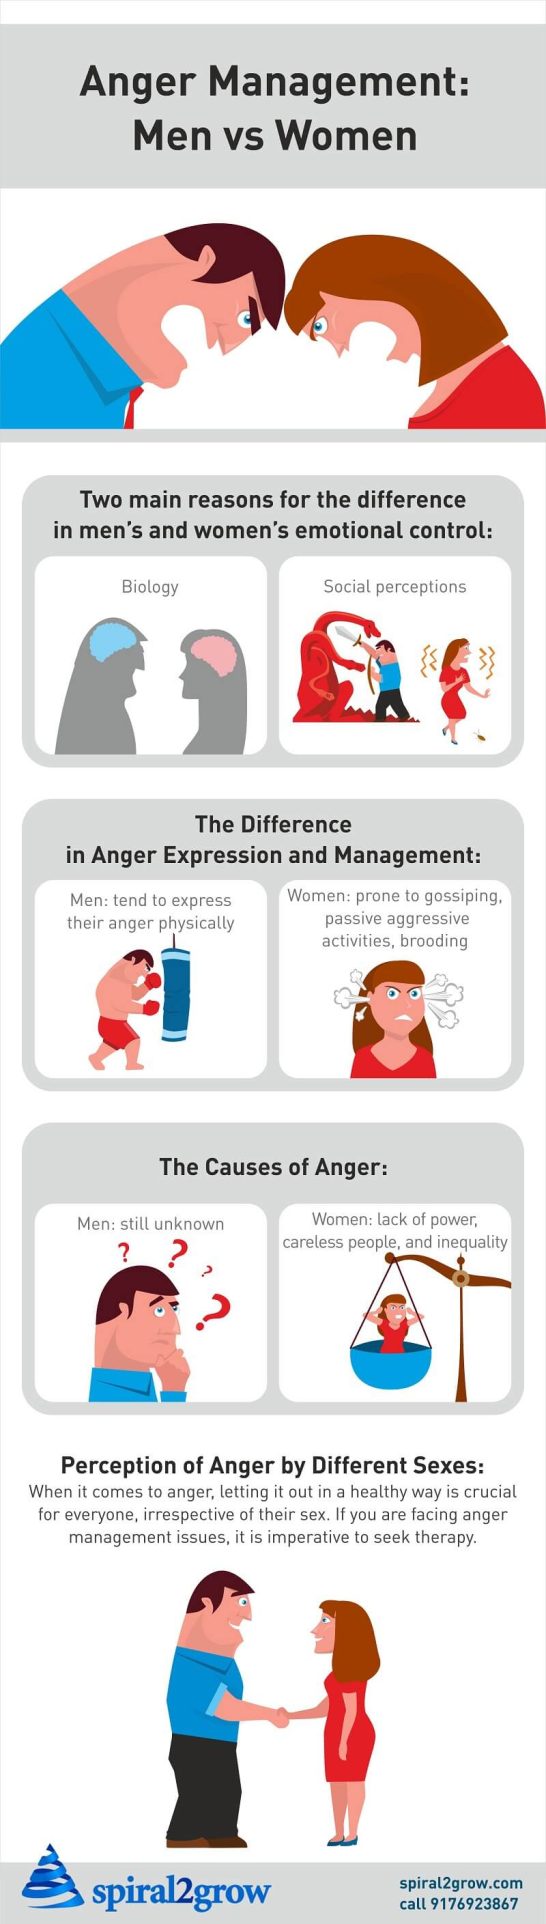 Anger Management in Men and Women: Is There Any Difference